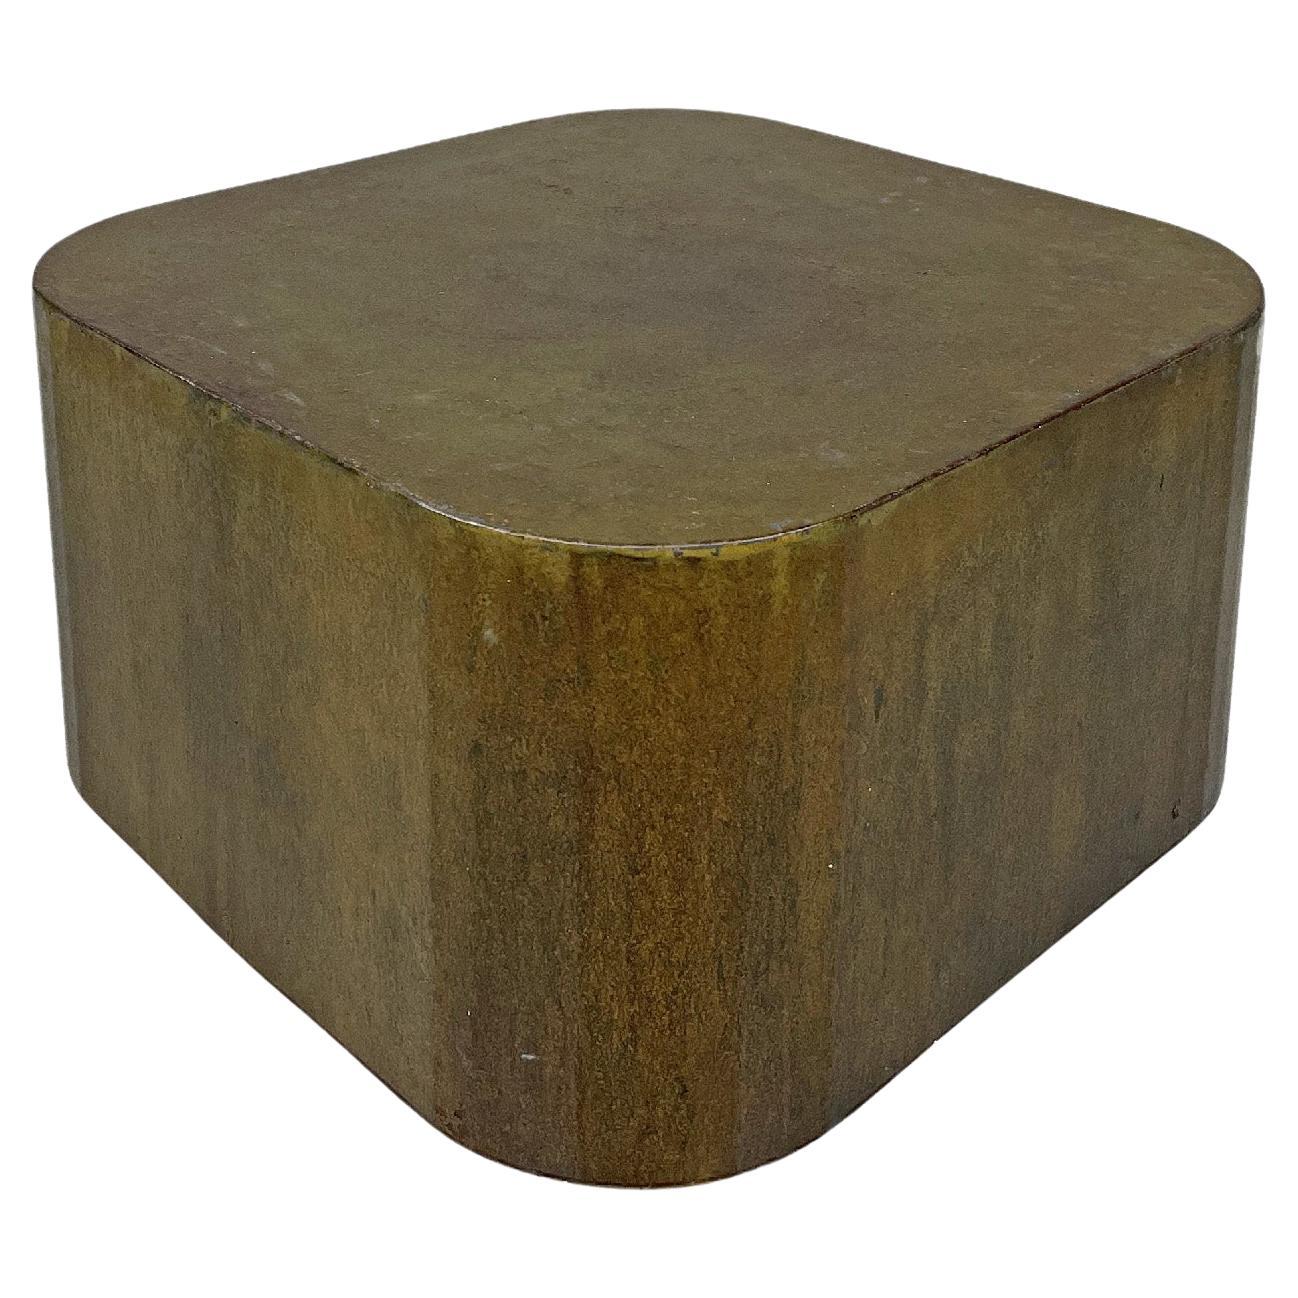 Italian post-modern squared coffee table or pedestal in Corten steel, 2000s For Sale